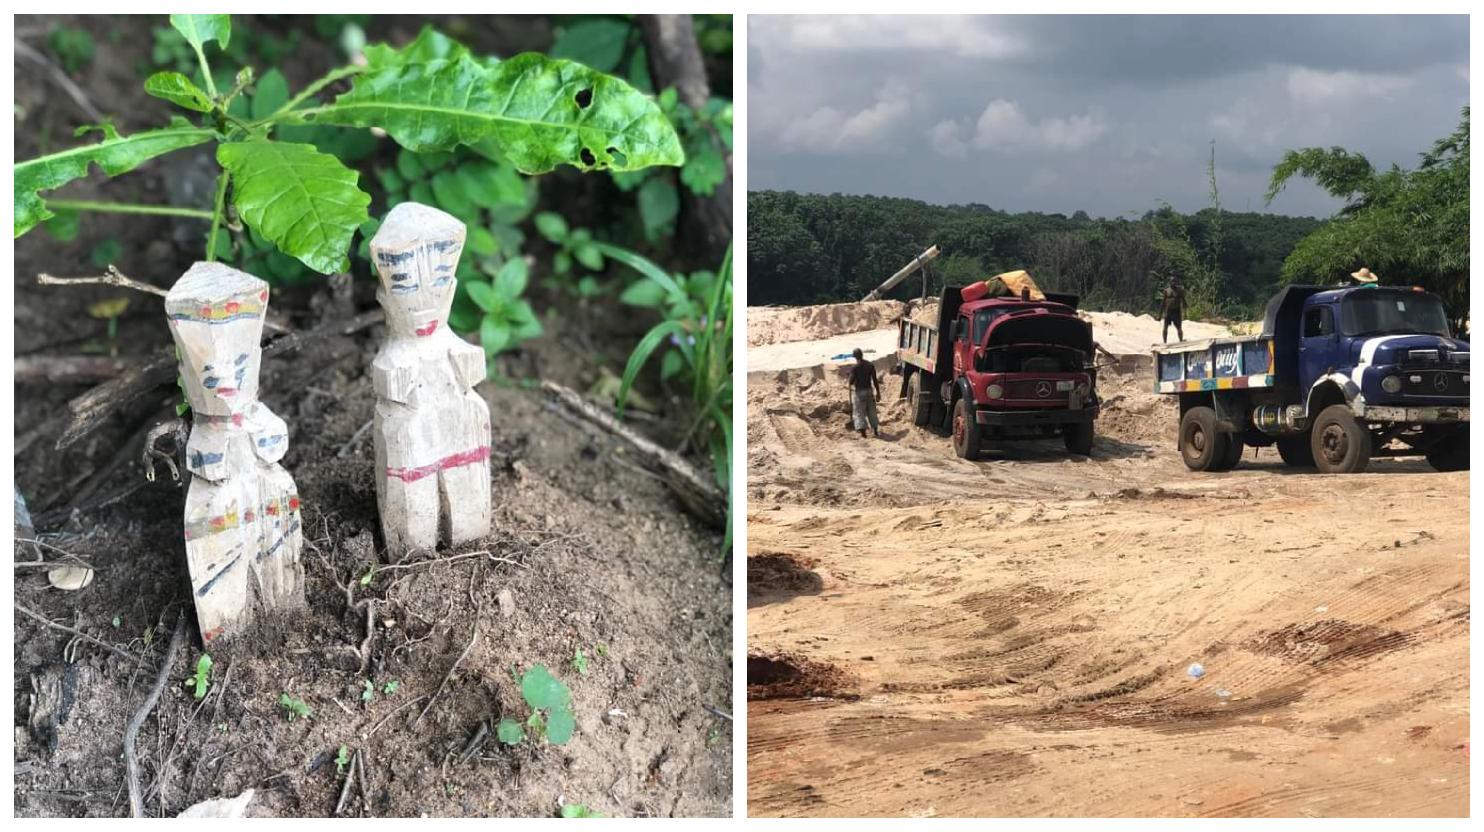 Wonders shall never end: Idols, believed to represent a couple, dug out and separated at a beach (Photos)